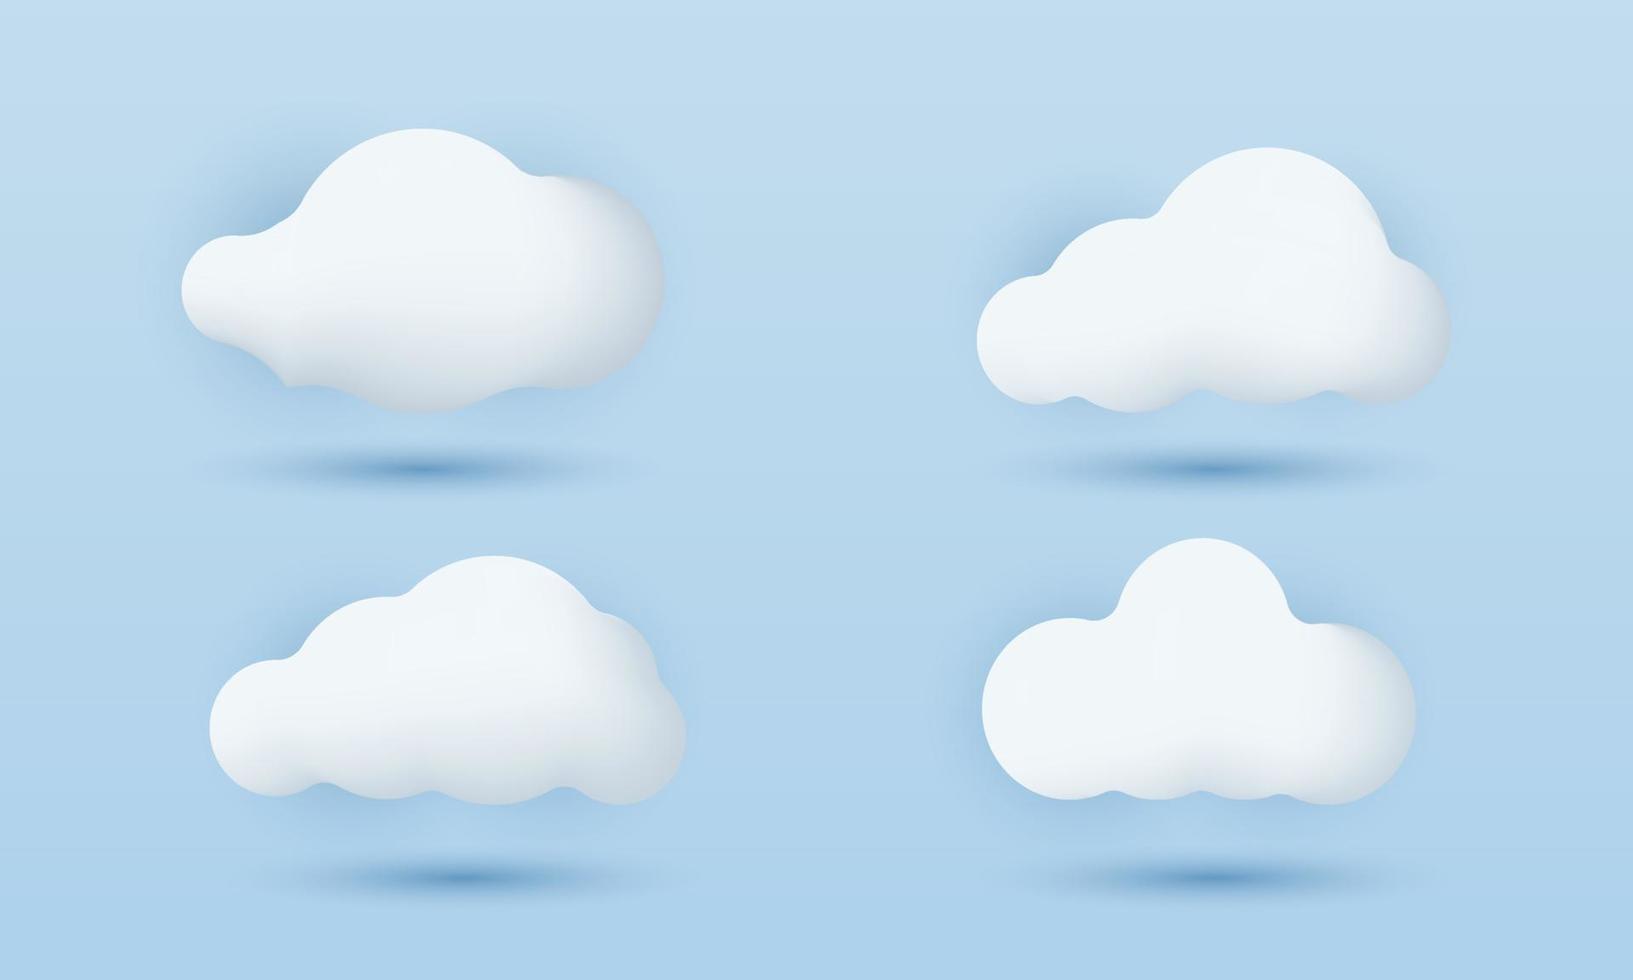 unique realistic white clouds set 3d design isolated on vector